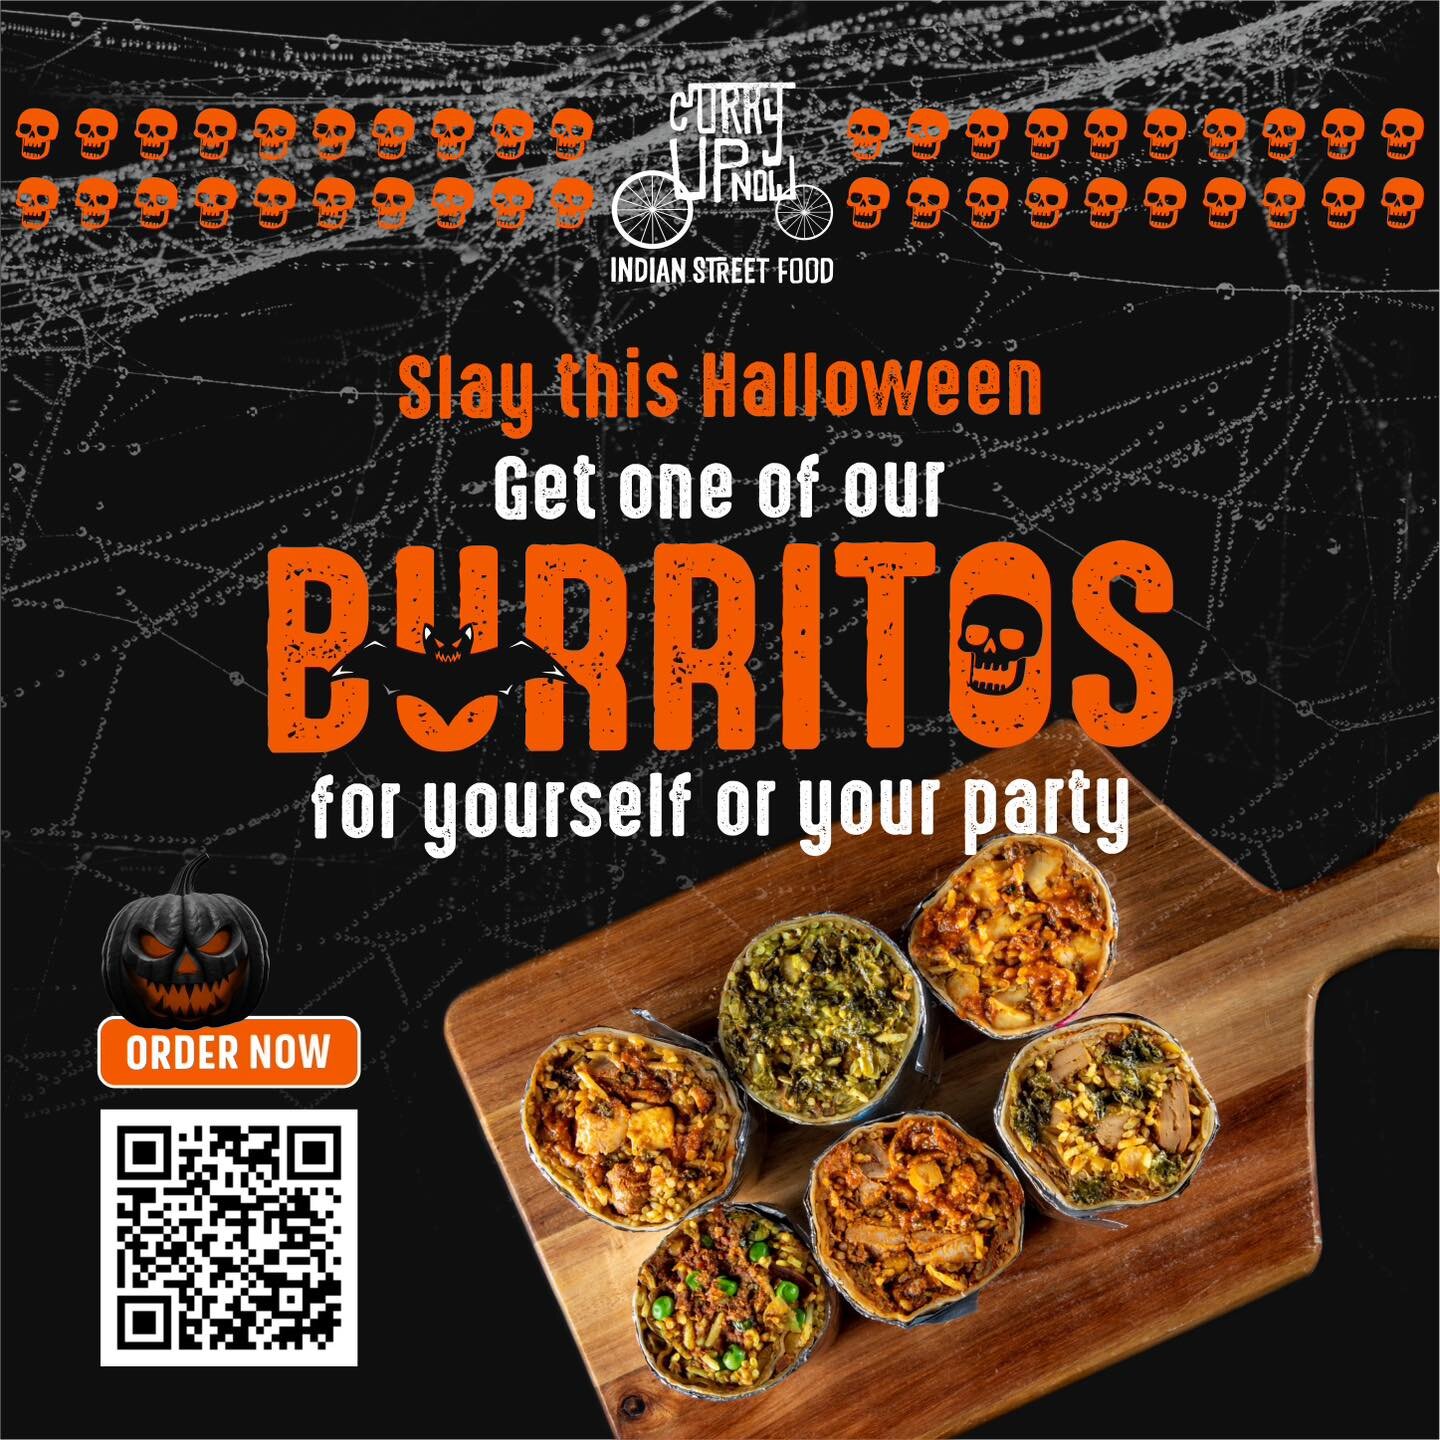 Wrapped tighter than a Mummy and are to die for!💀

Get your Burritos now: Link in bio

#CurryUpNow #HappyHalloween #BloodyGoodBurritos